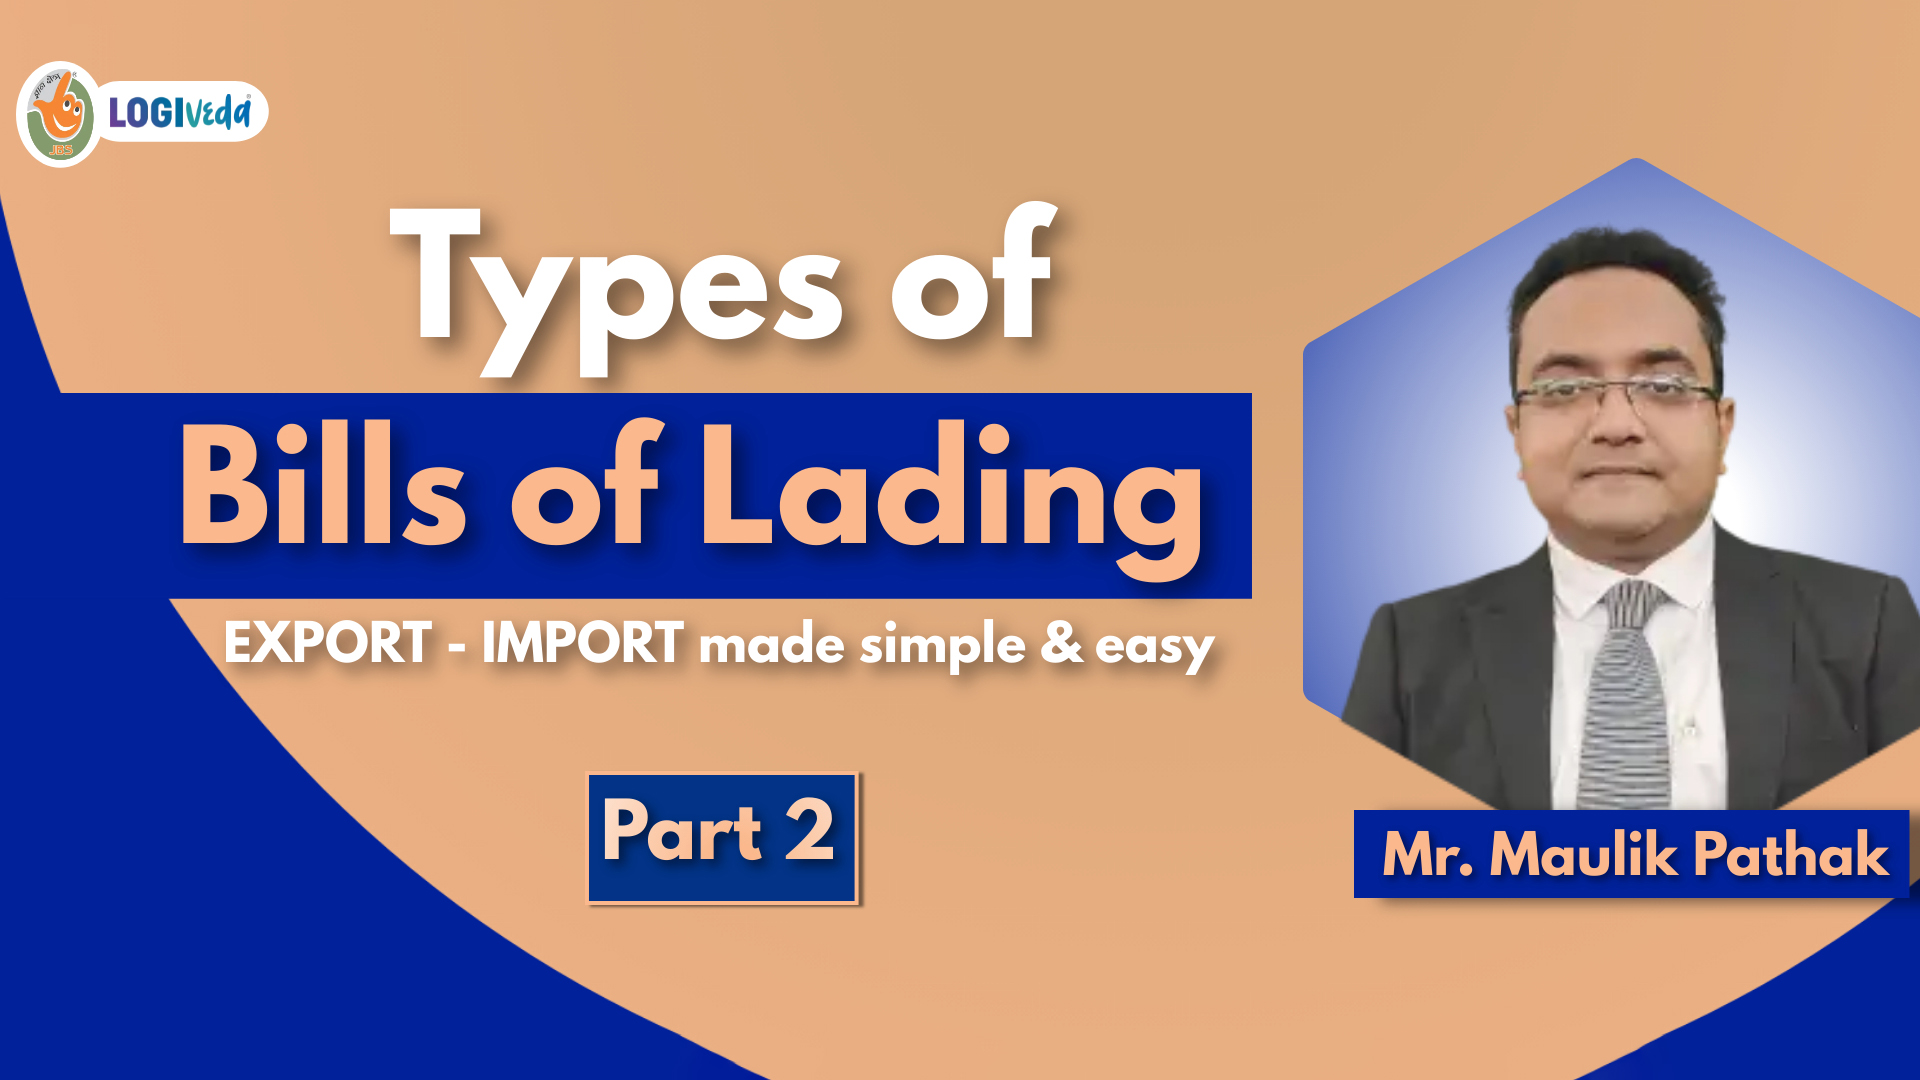 Types of Bills of Lading | Export - Import made simple and easy | Part 2 | Mr. Maulik Pathak